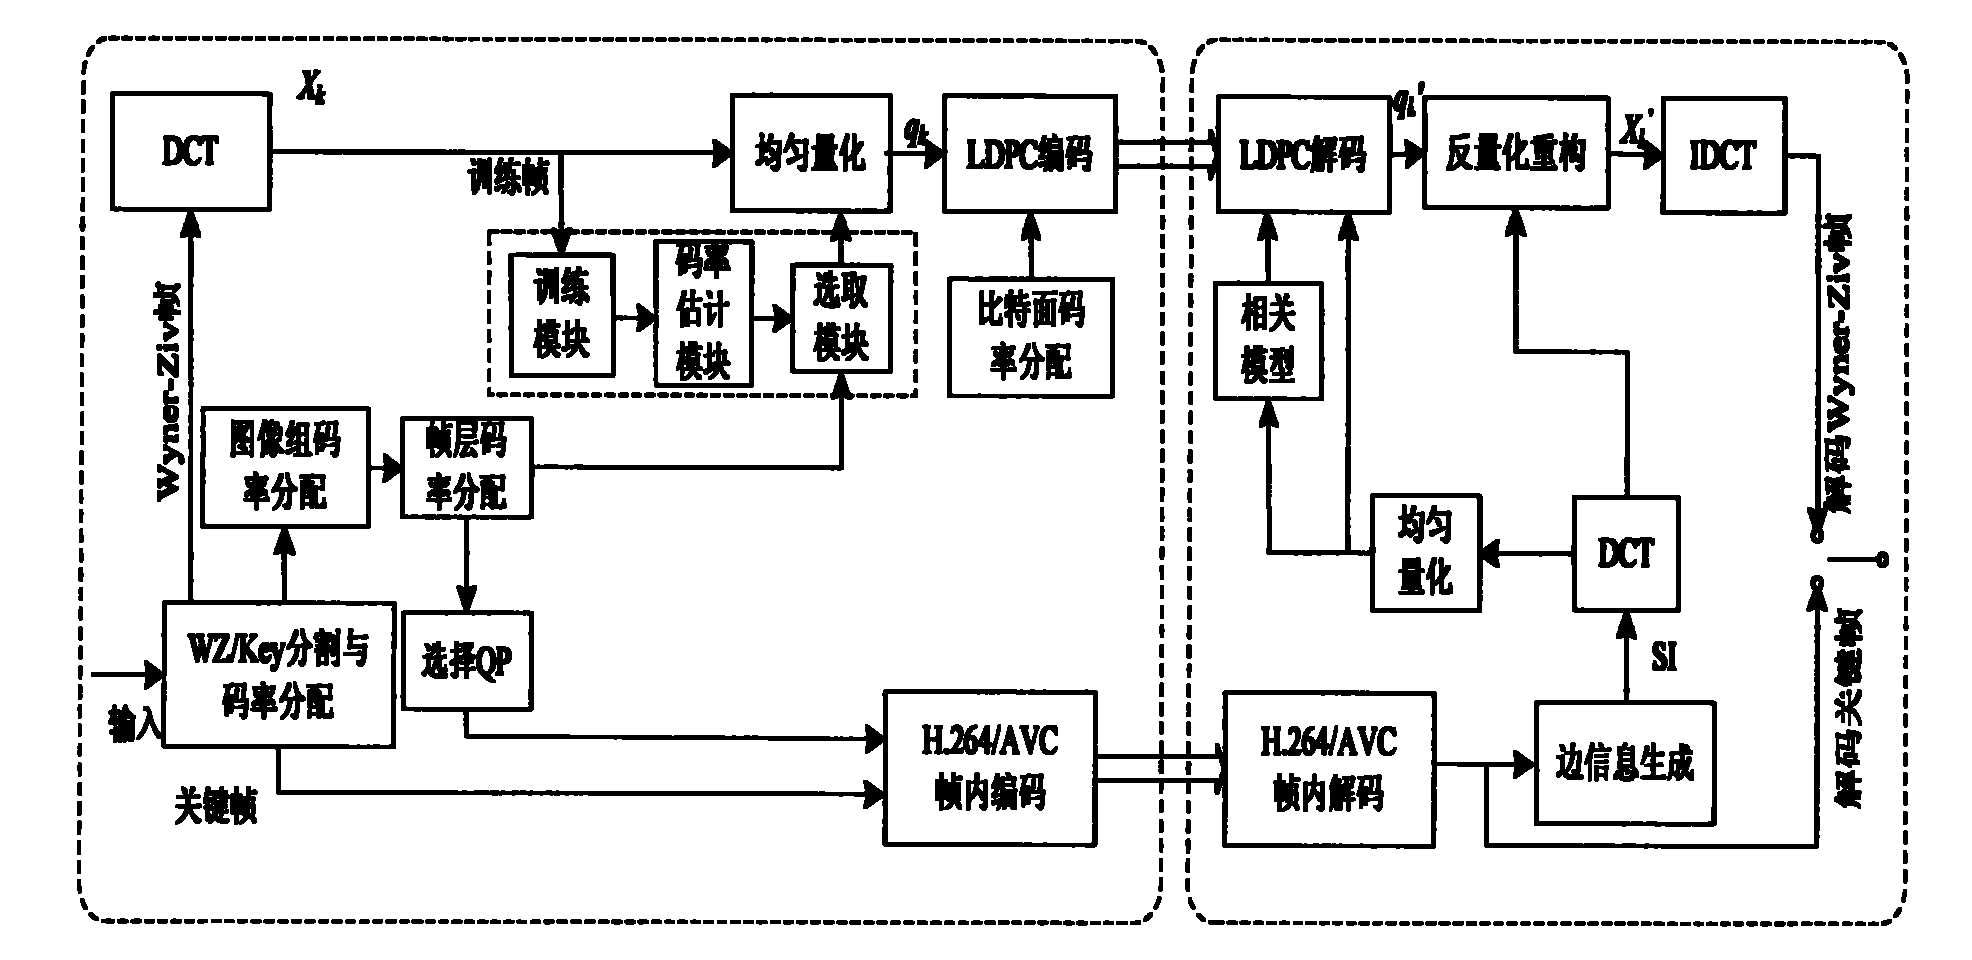 Wyner-Ziv-video-coding-based Wyner-Ziv frame code rate control system and method